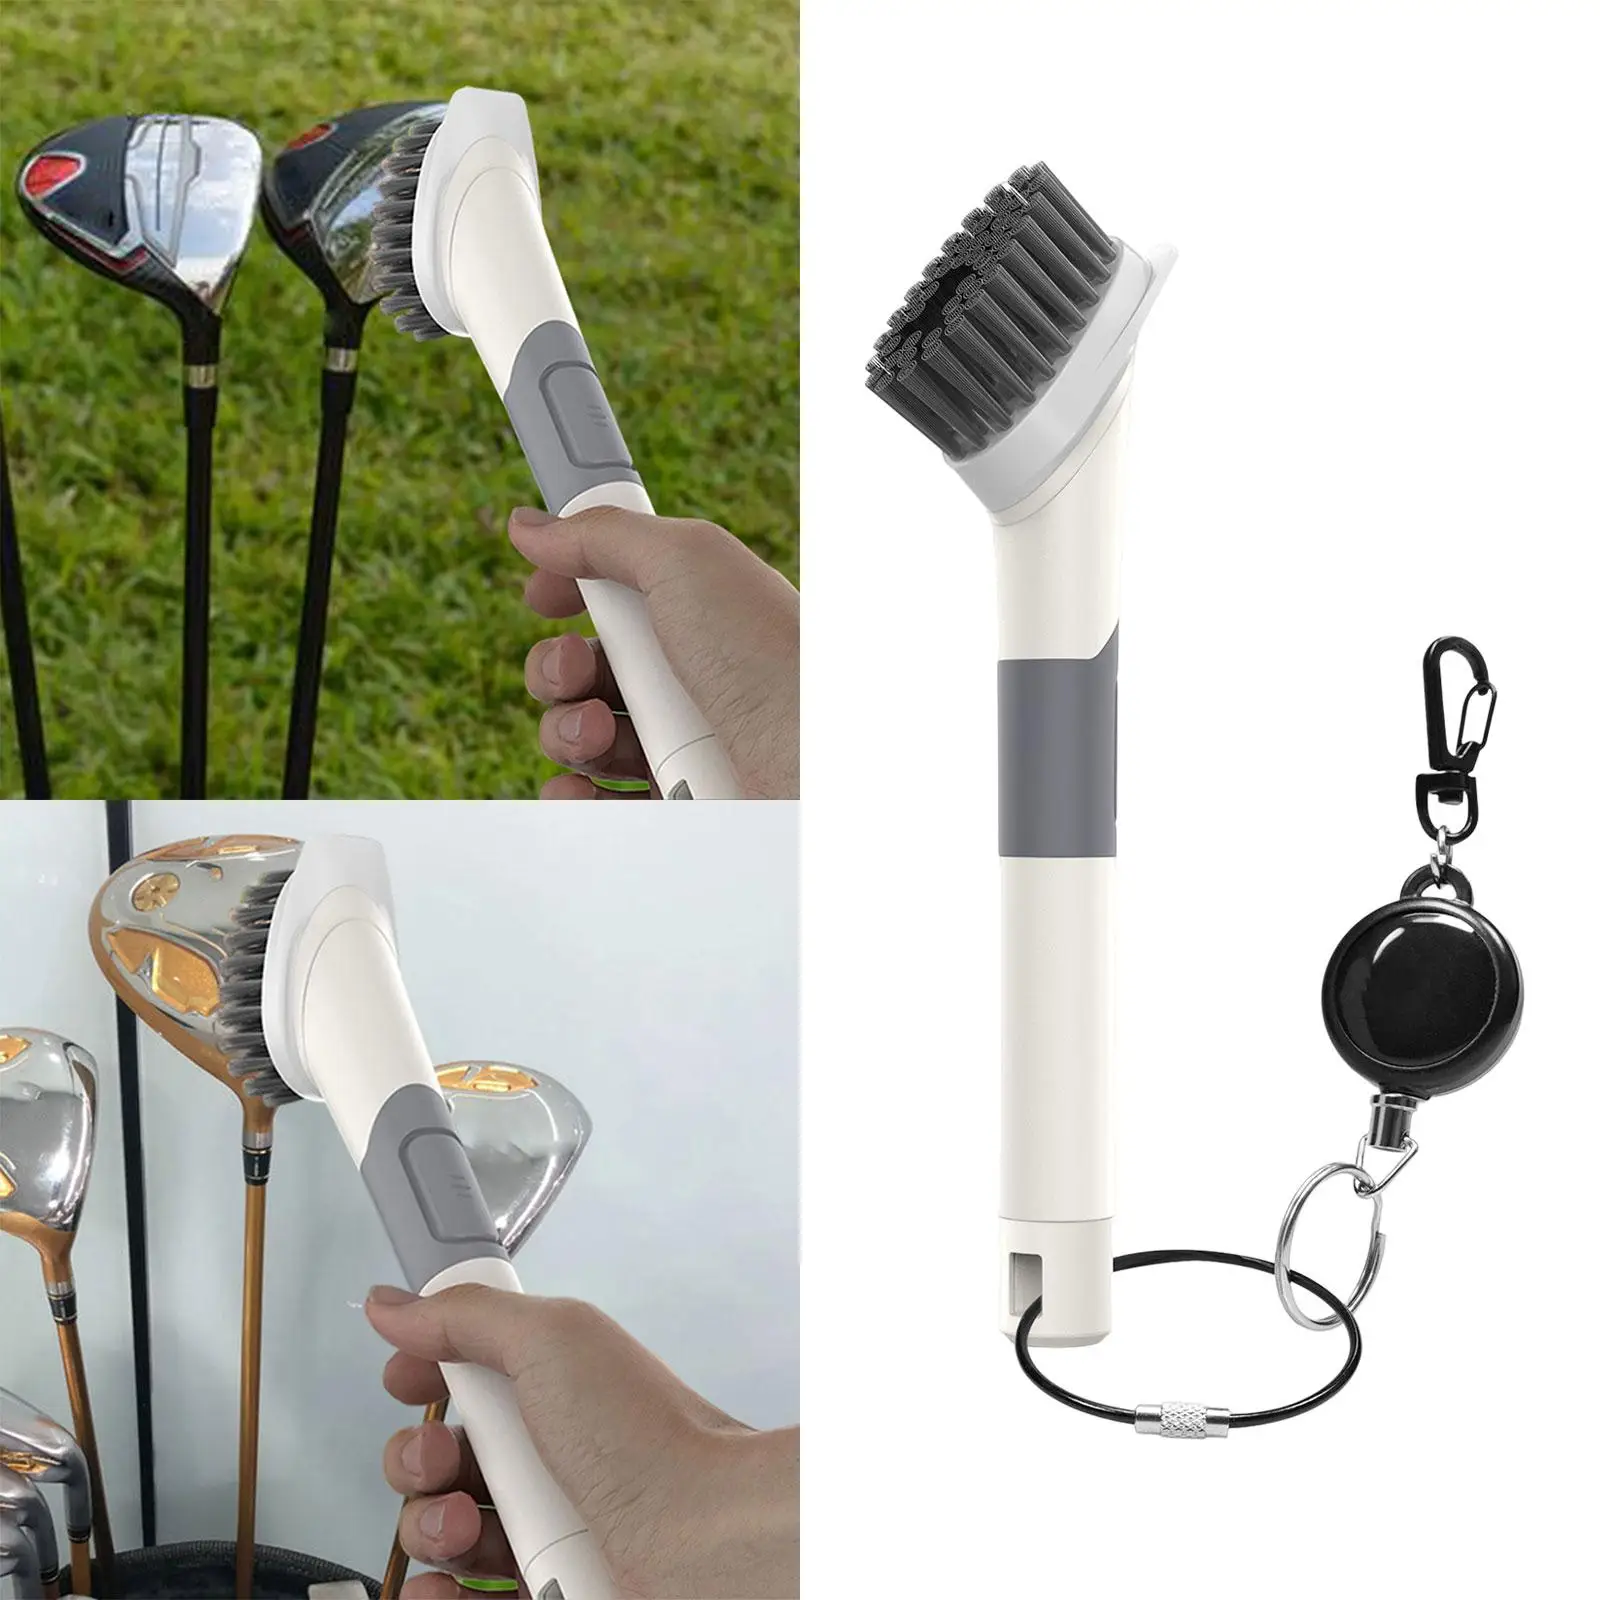 Golf Club Cleaner Brush Cleaning Brushes Portable Easily Attached to Golf Bag for Golf Lover Gifts